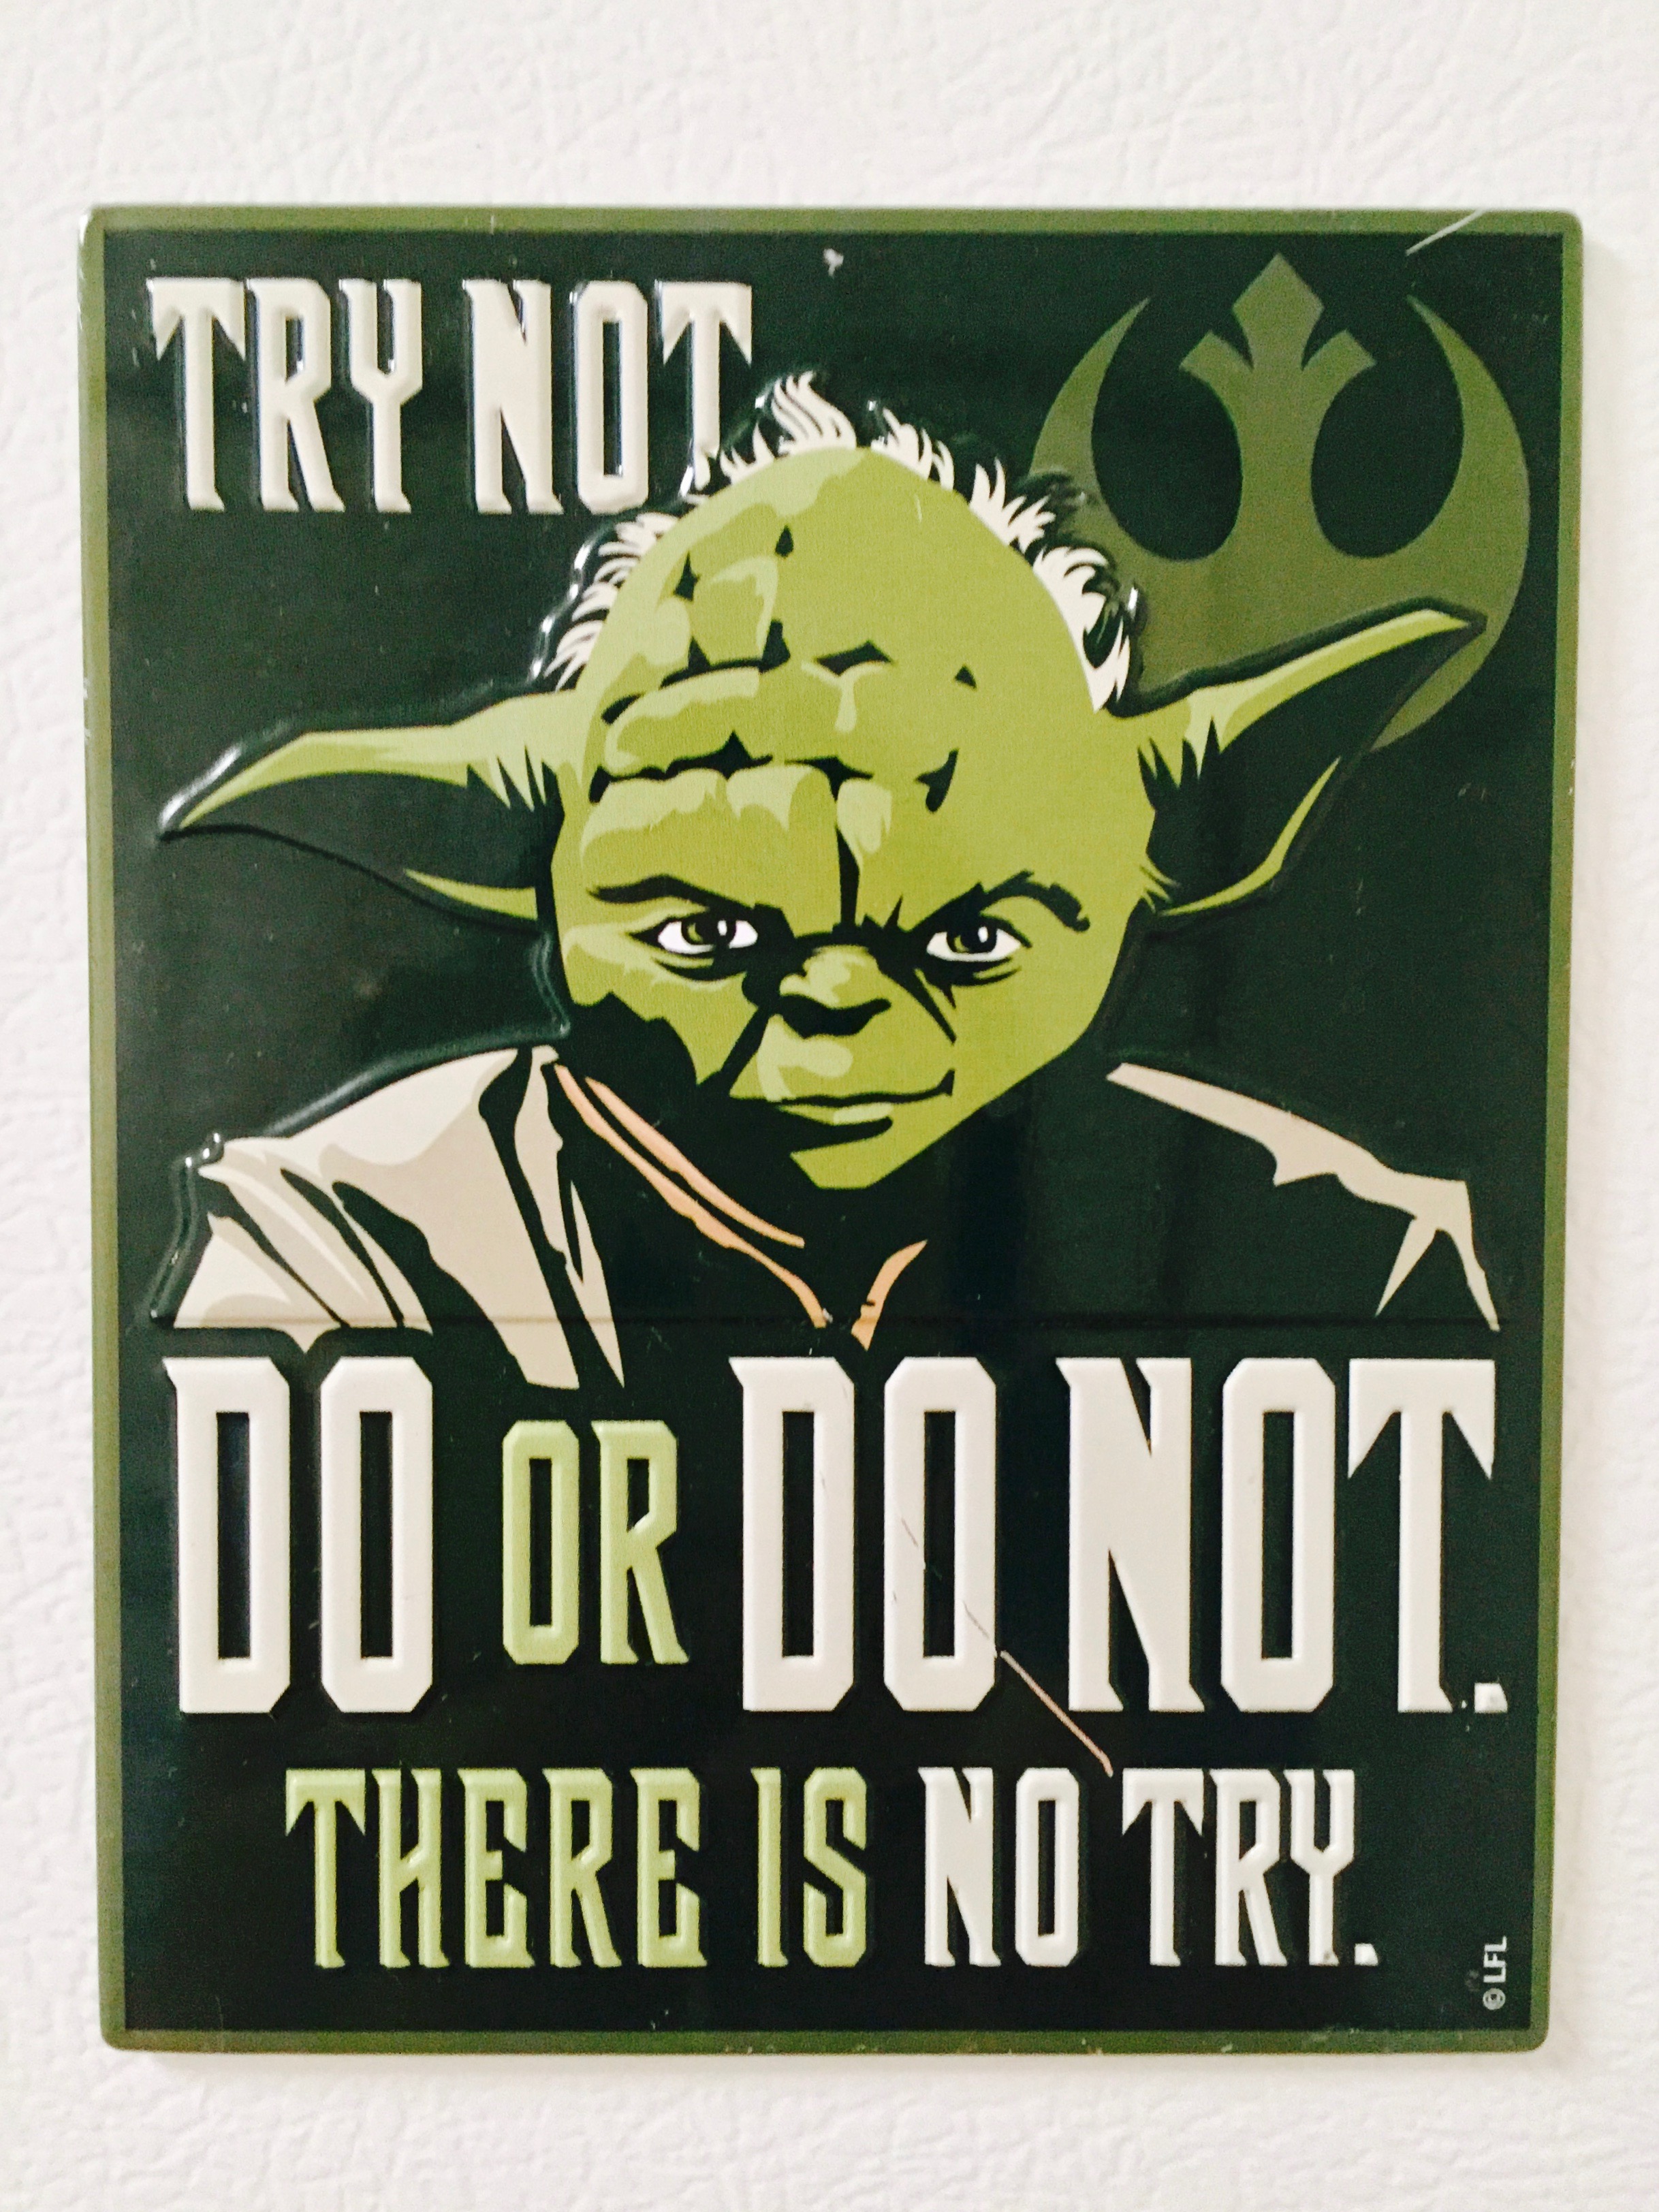 Try not. Do or do not. There is no try.